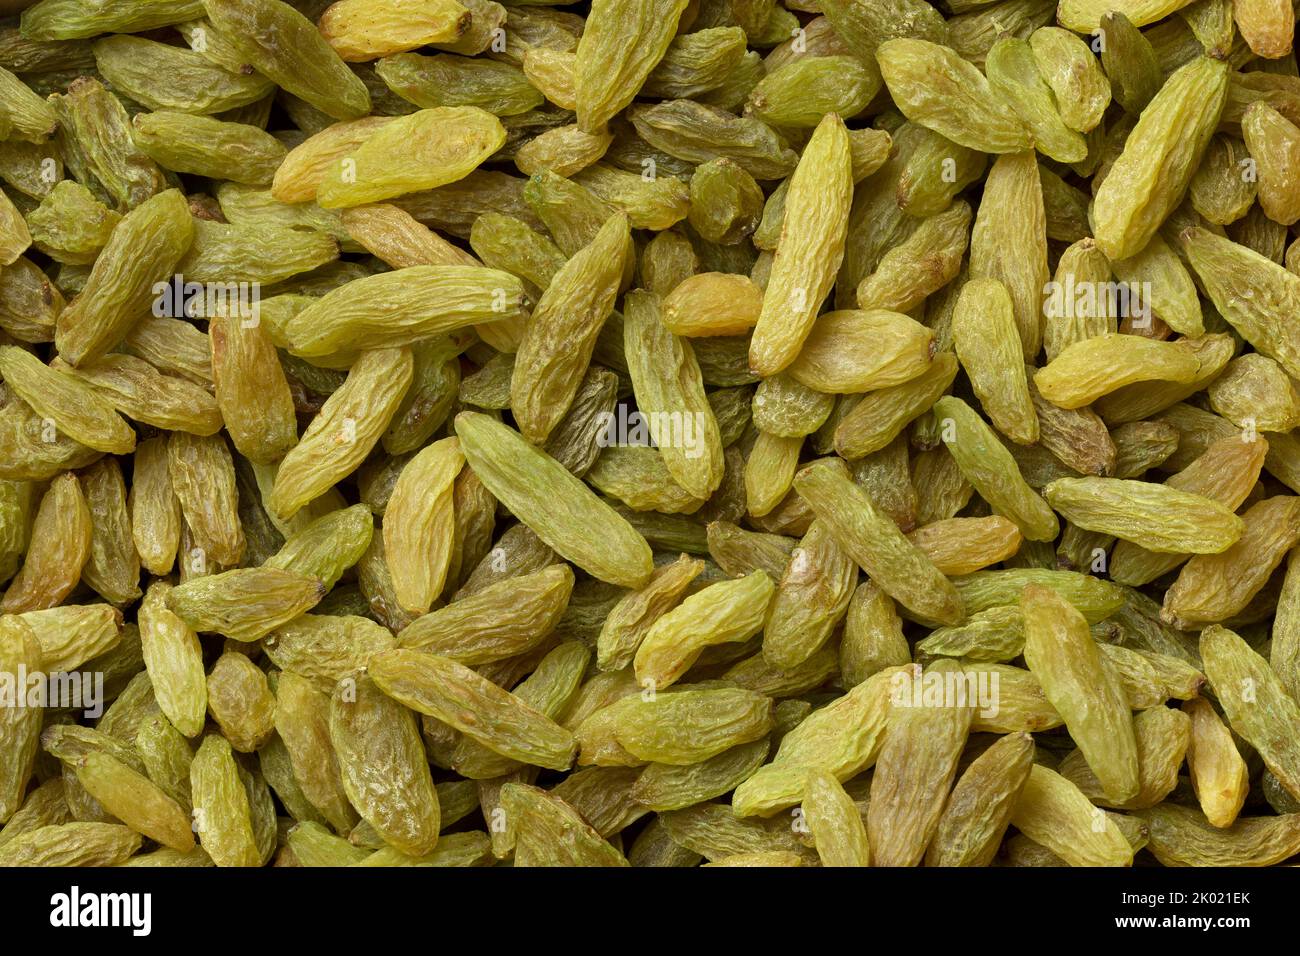 Sweet dried green sweet Afghans raisins full frame close up as background Stock Photo